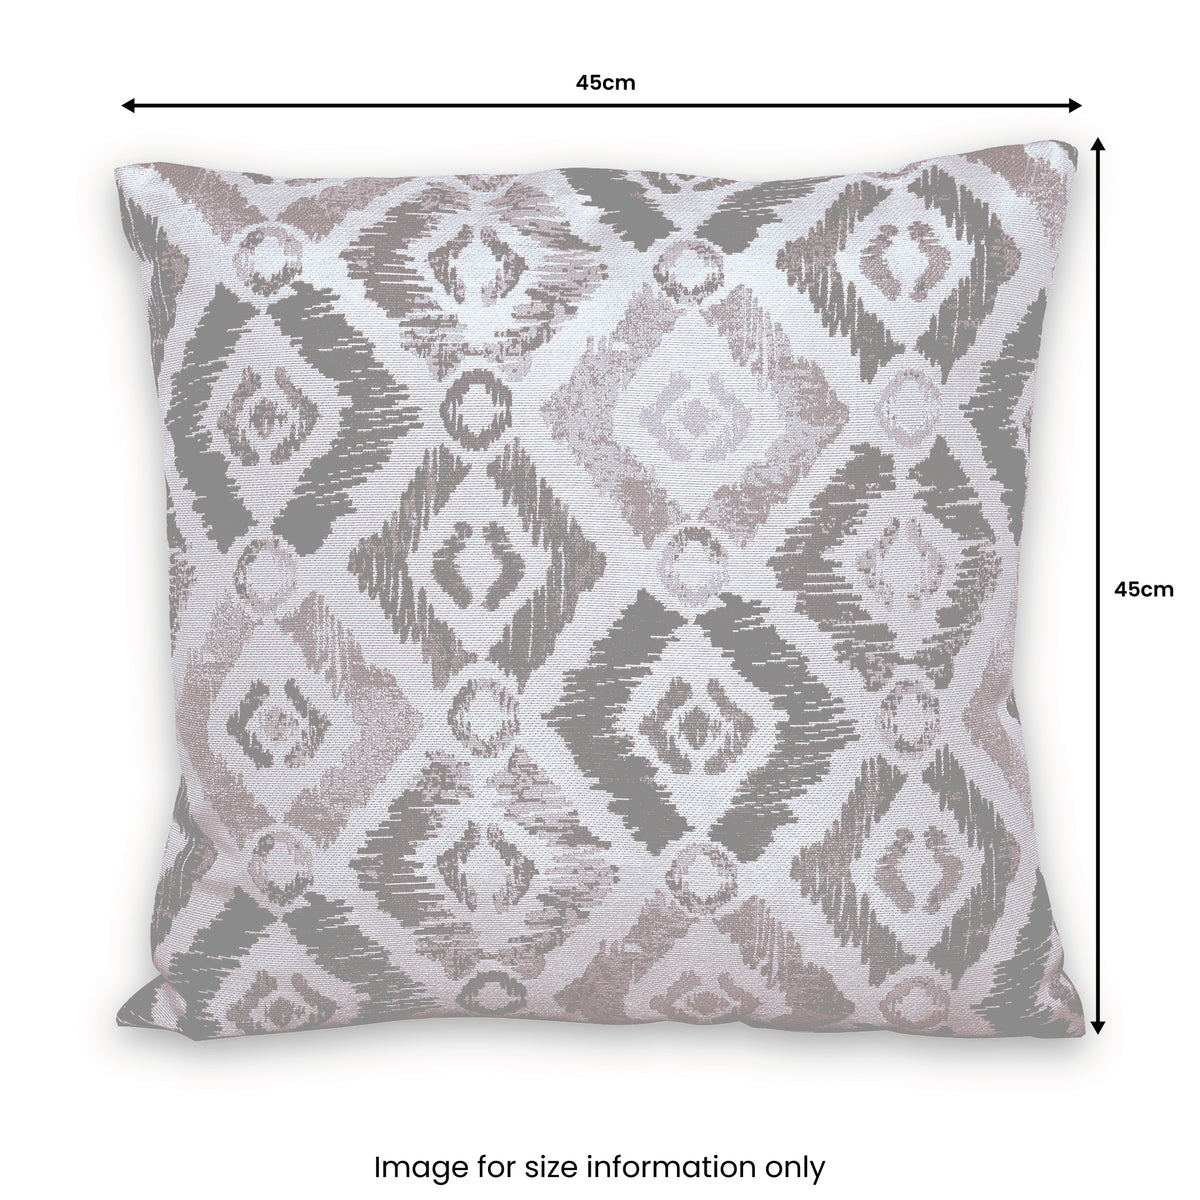 Outdoor Grey Patterned Scatter Cushion dimensions